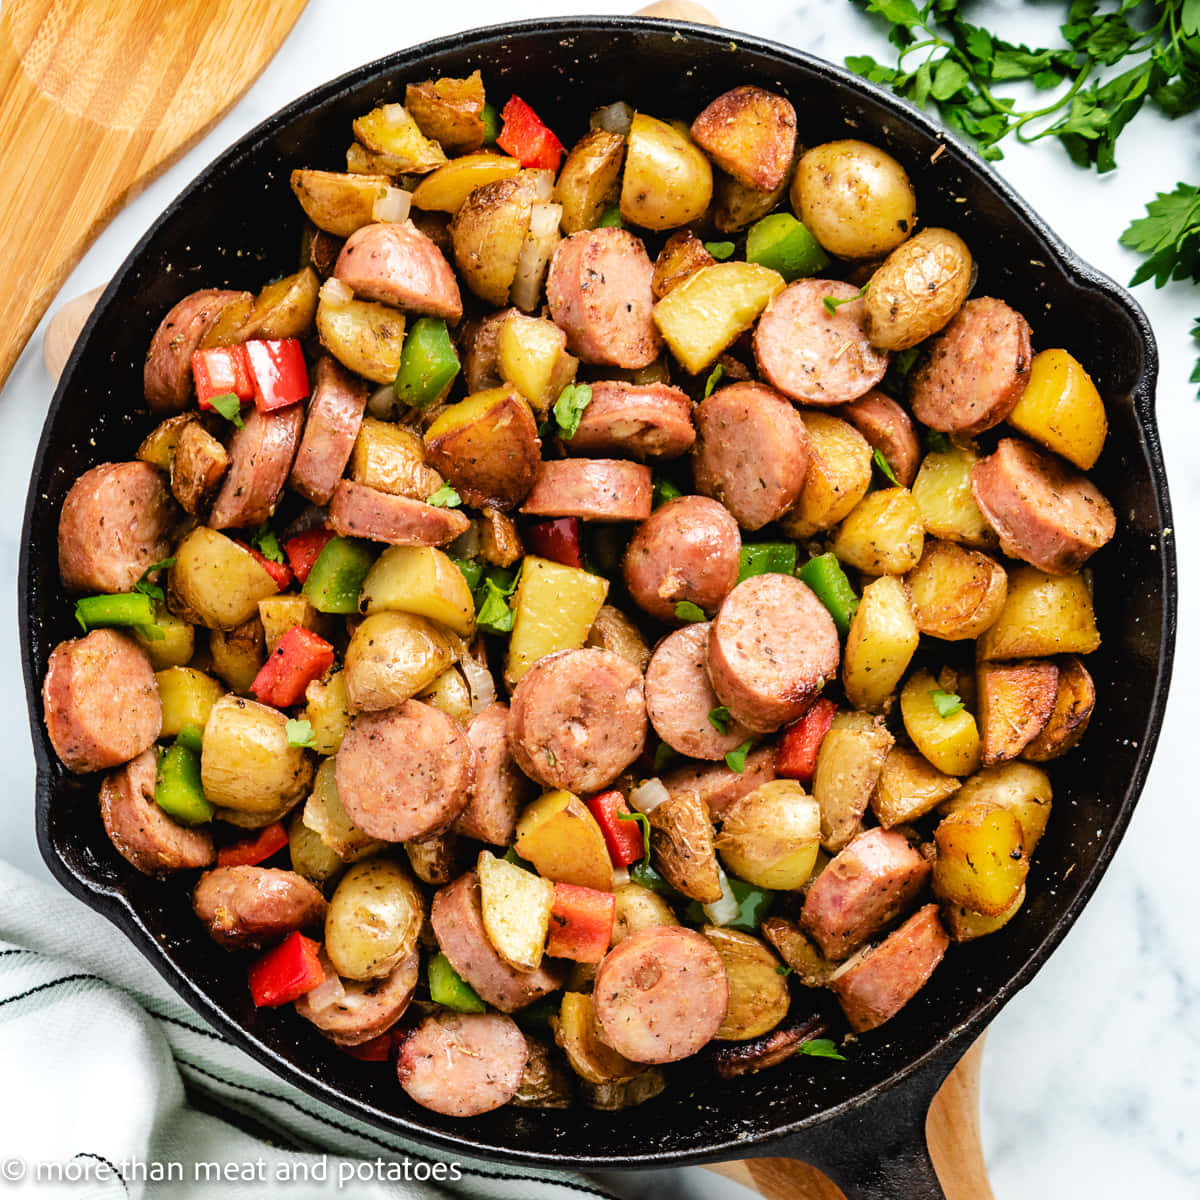 A Skillet With Potatoes And Sausage